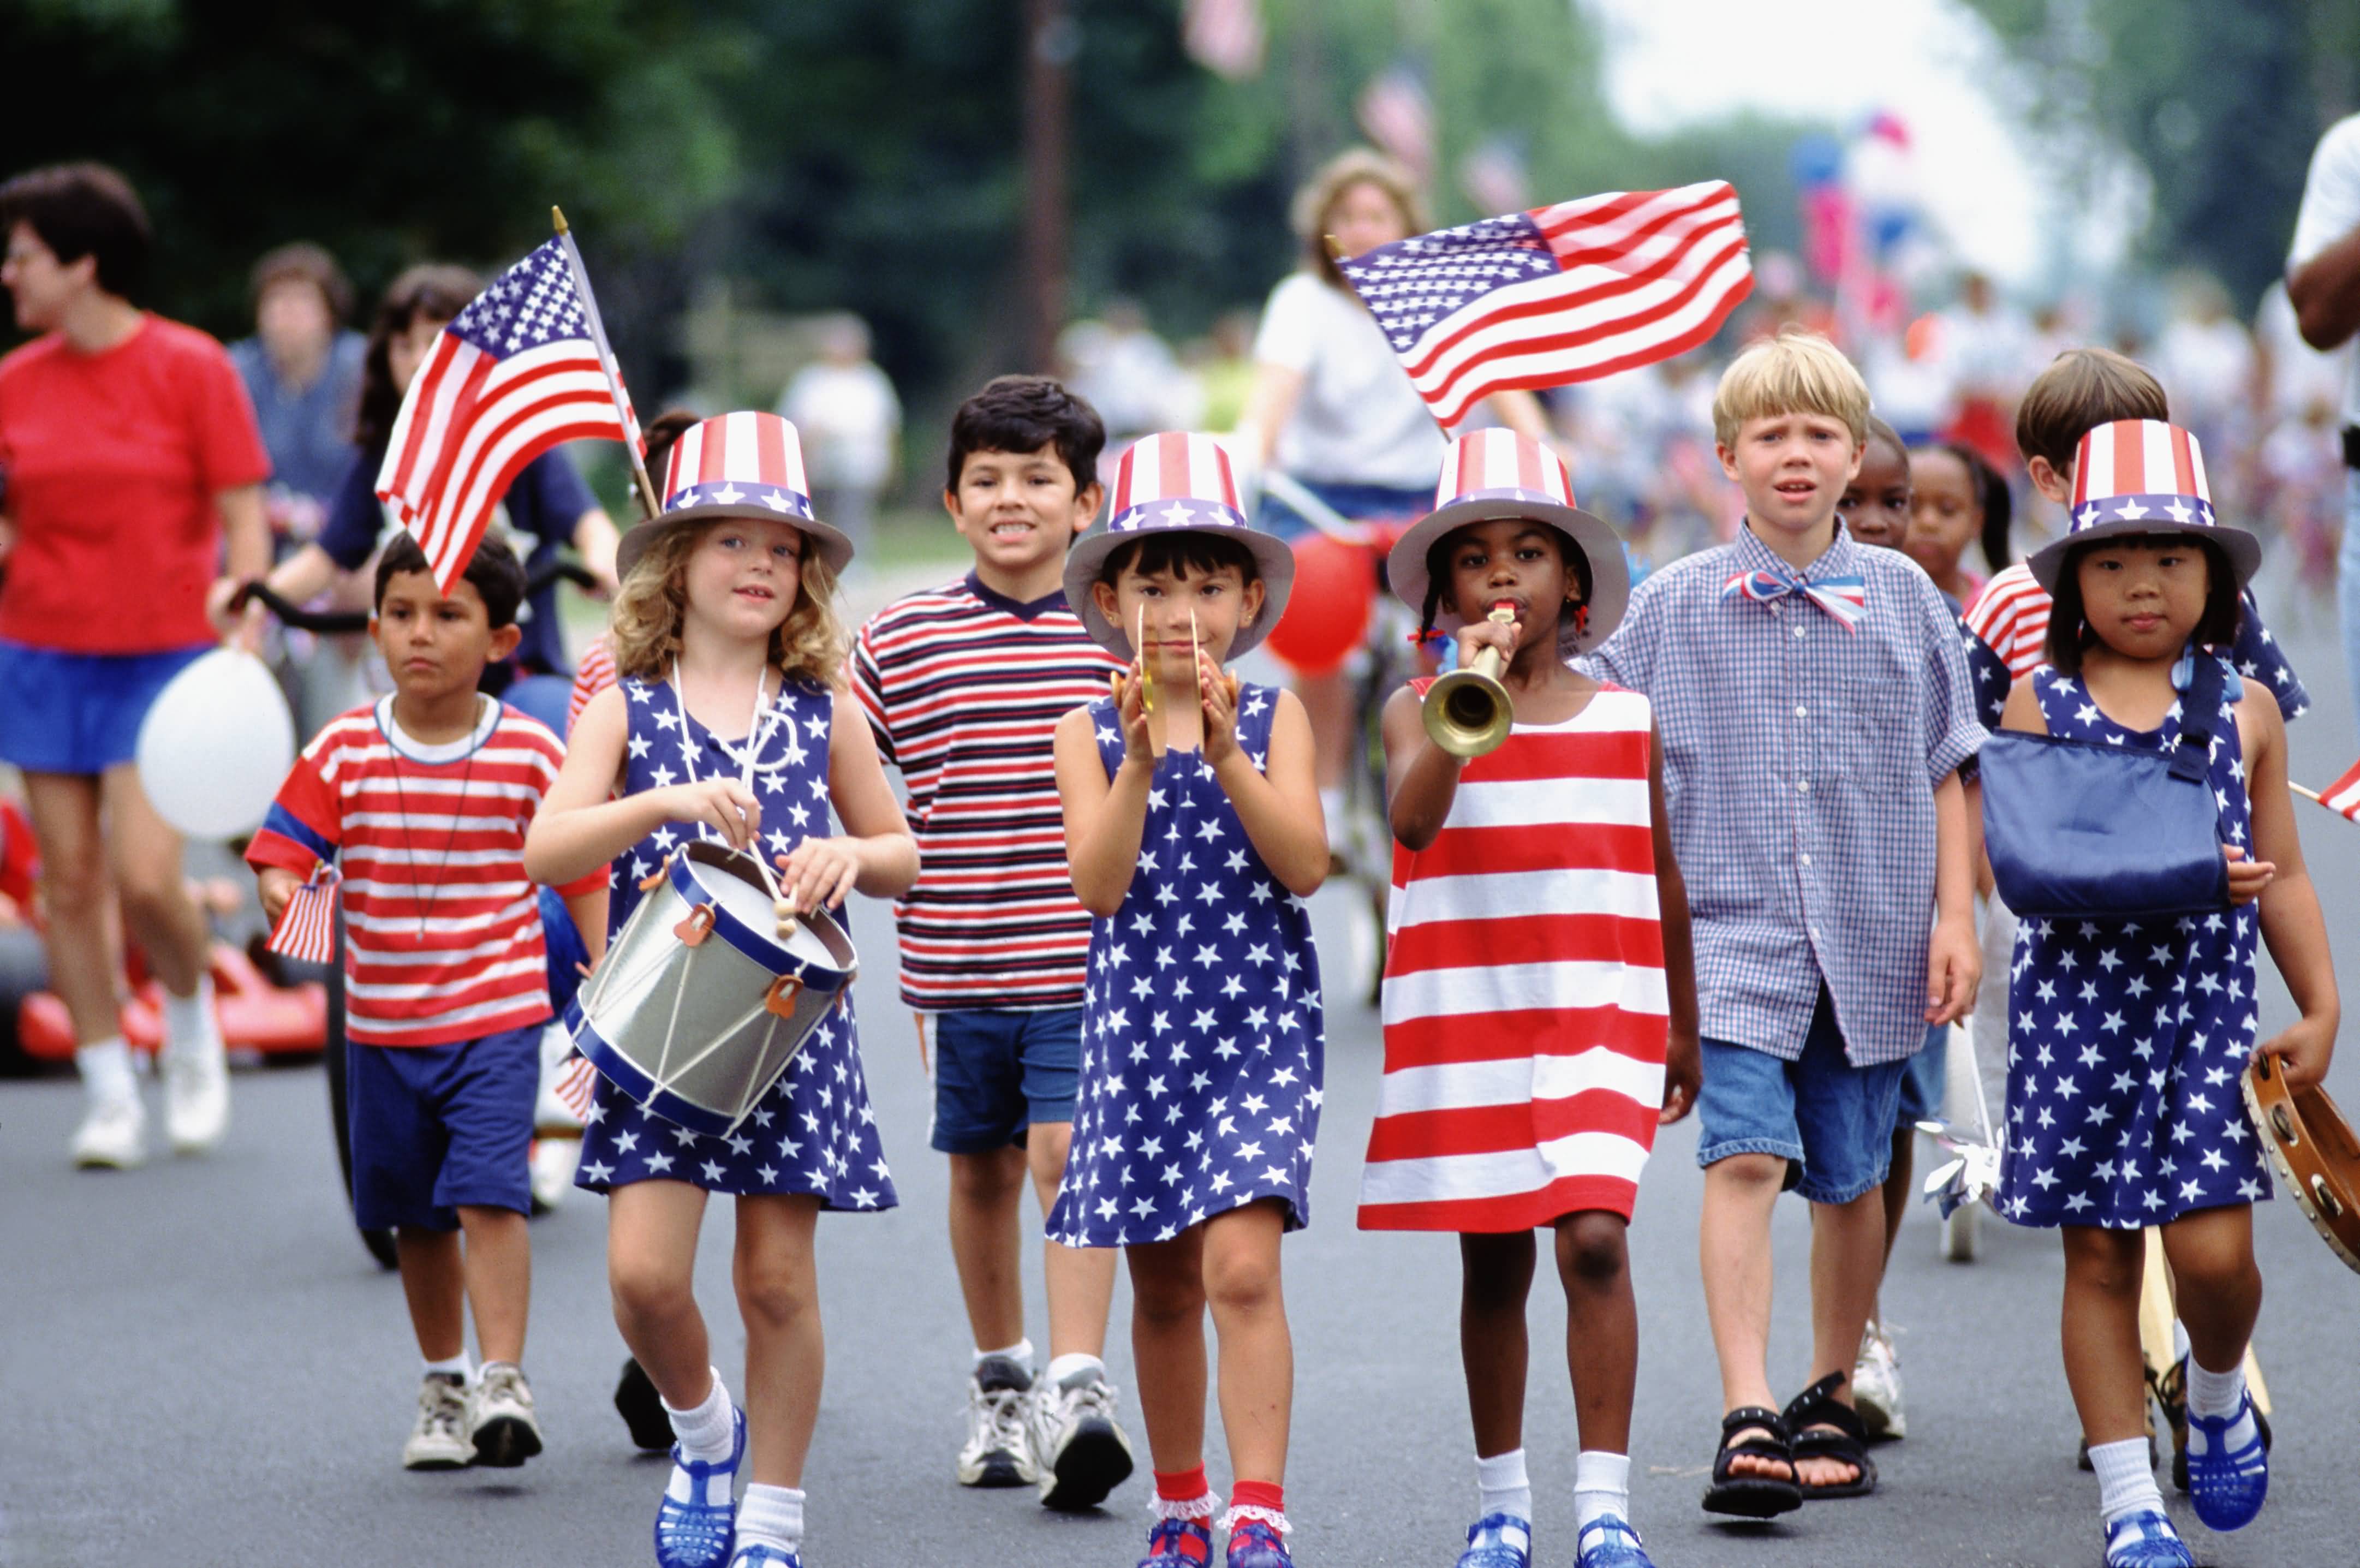 Children Celebrating 4th July With Independence Day Parade